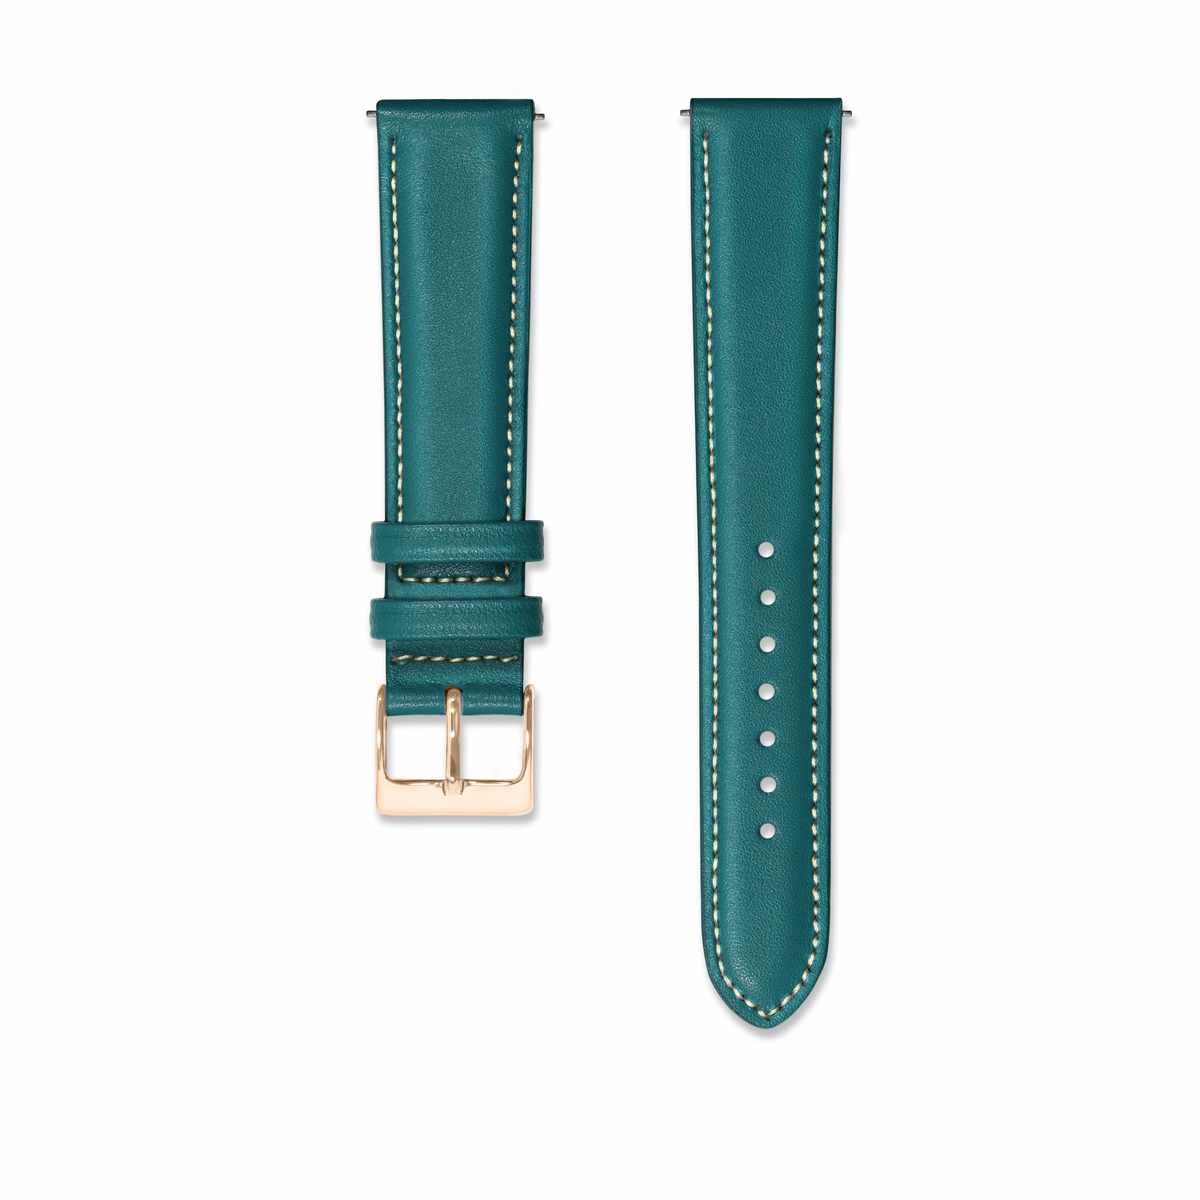 Peacock leather strap 18mm